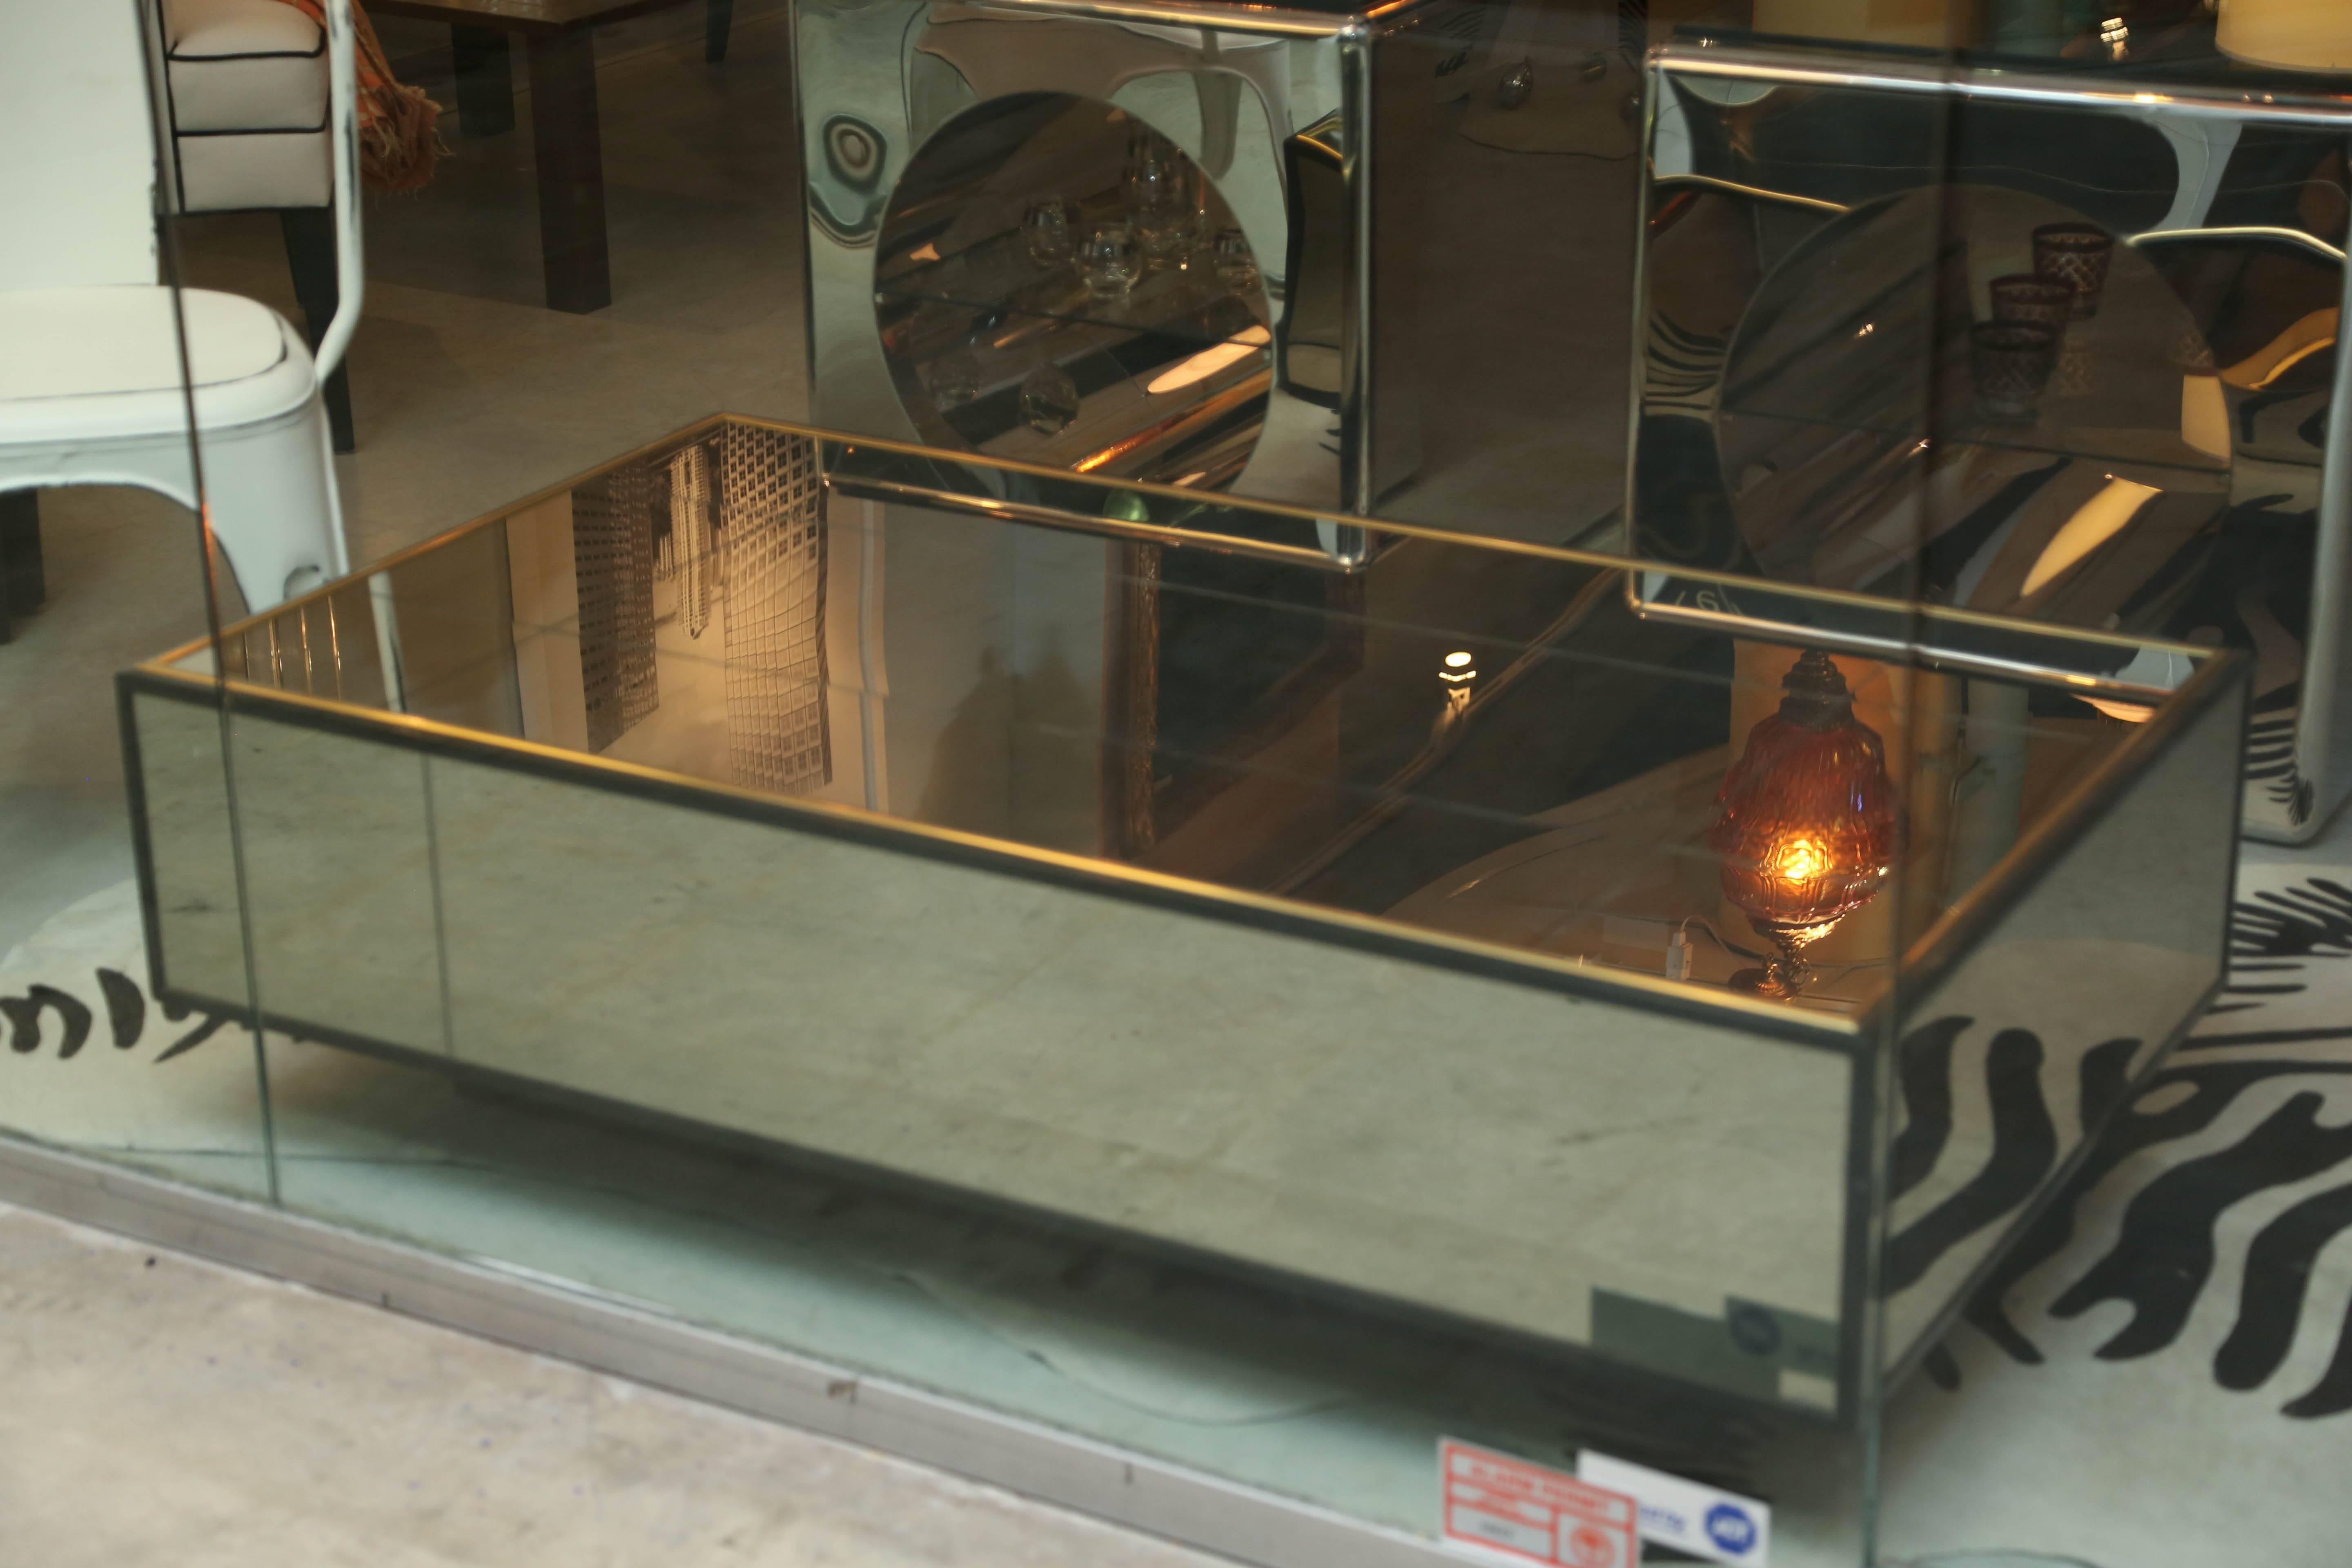 North American Mirrored Coffee Table, Lg Century Similar to One in Yves Saint Laurent Paris Apt